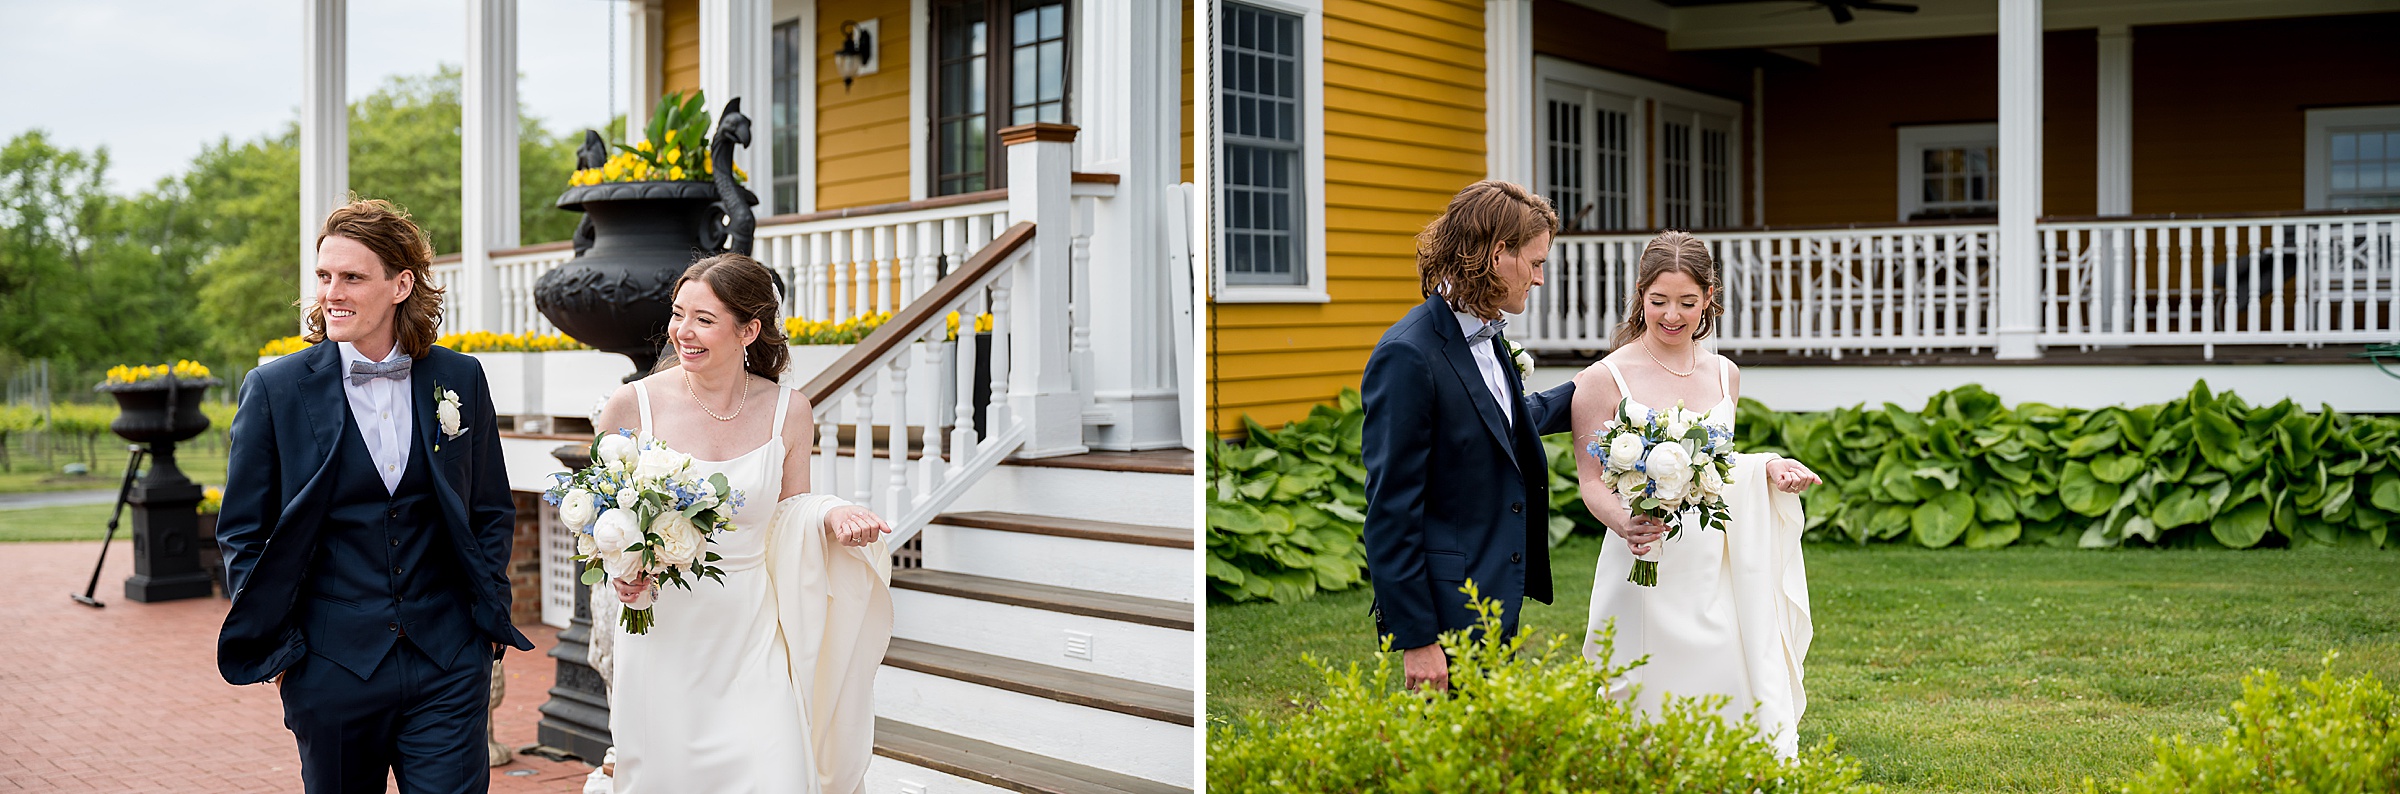 A wedding couple walks outdoors; the groom wears a dark suit and the bride carries a bouquet. They are beside a yellow house with white trim and a porch with greenery in the background.